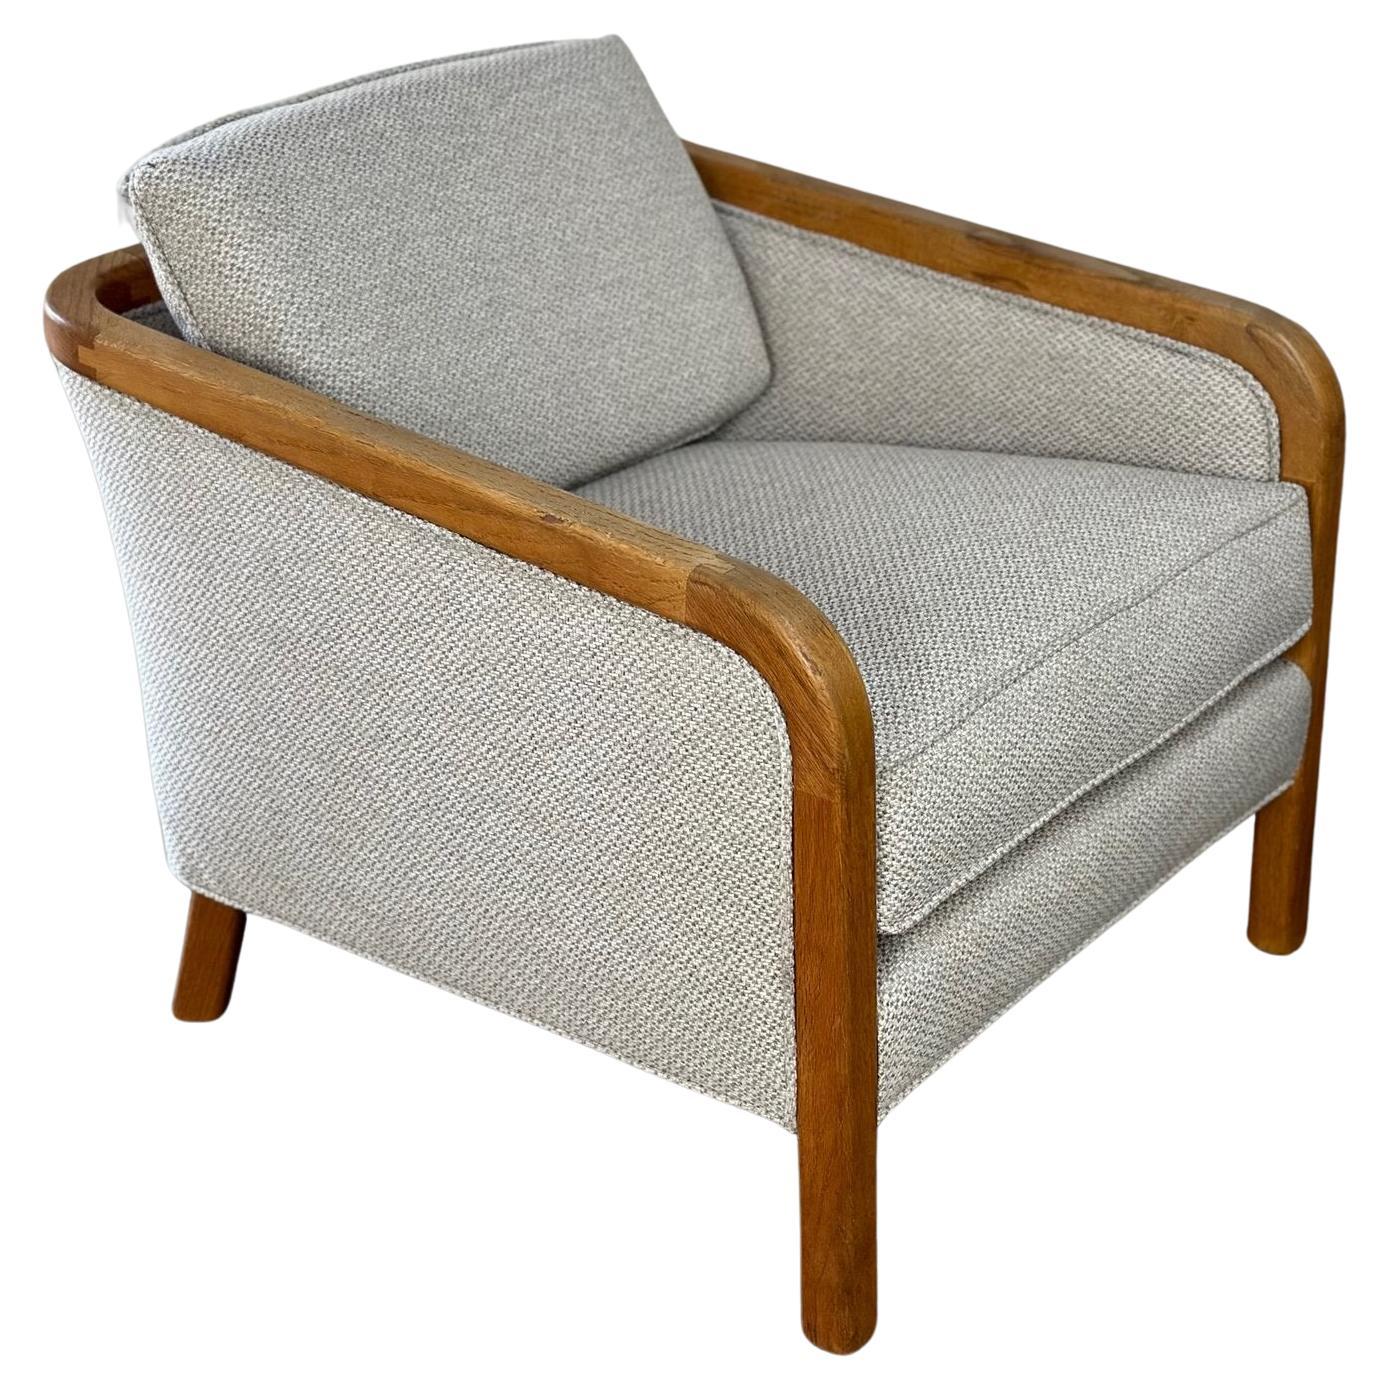 Mid century lounge chair with exposed joinery For Sale